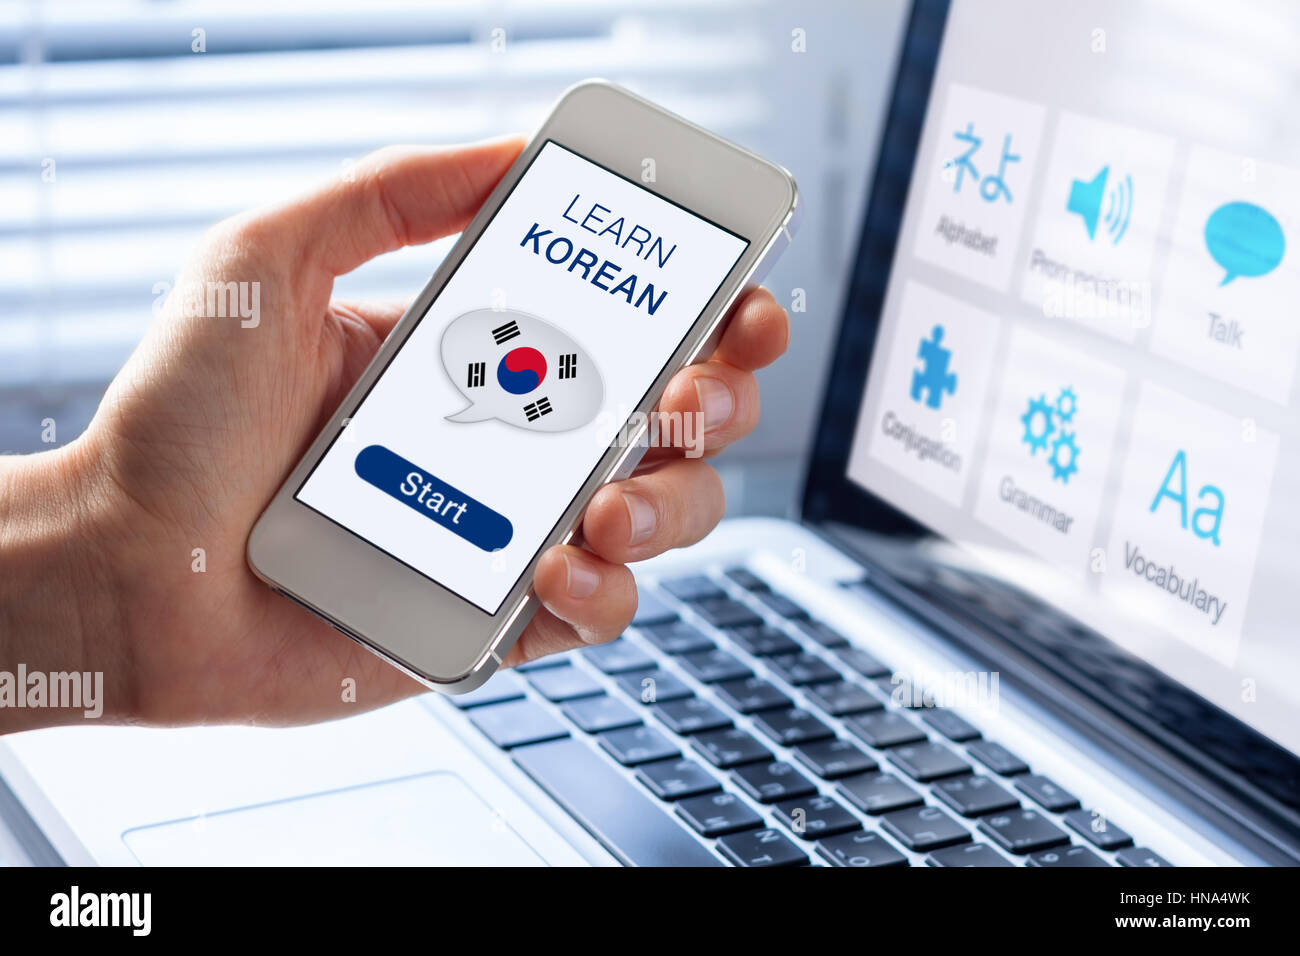 Learn Korean language online concept with a person showing e-learning app on mobile phone with the flag of South Korea Stock Photo